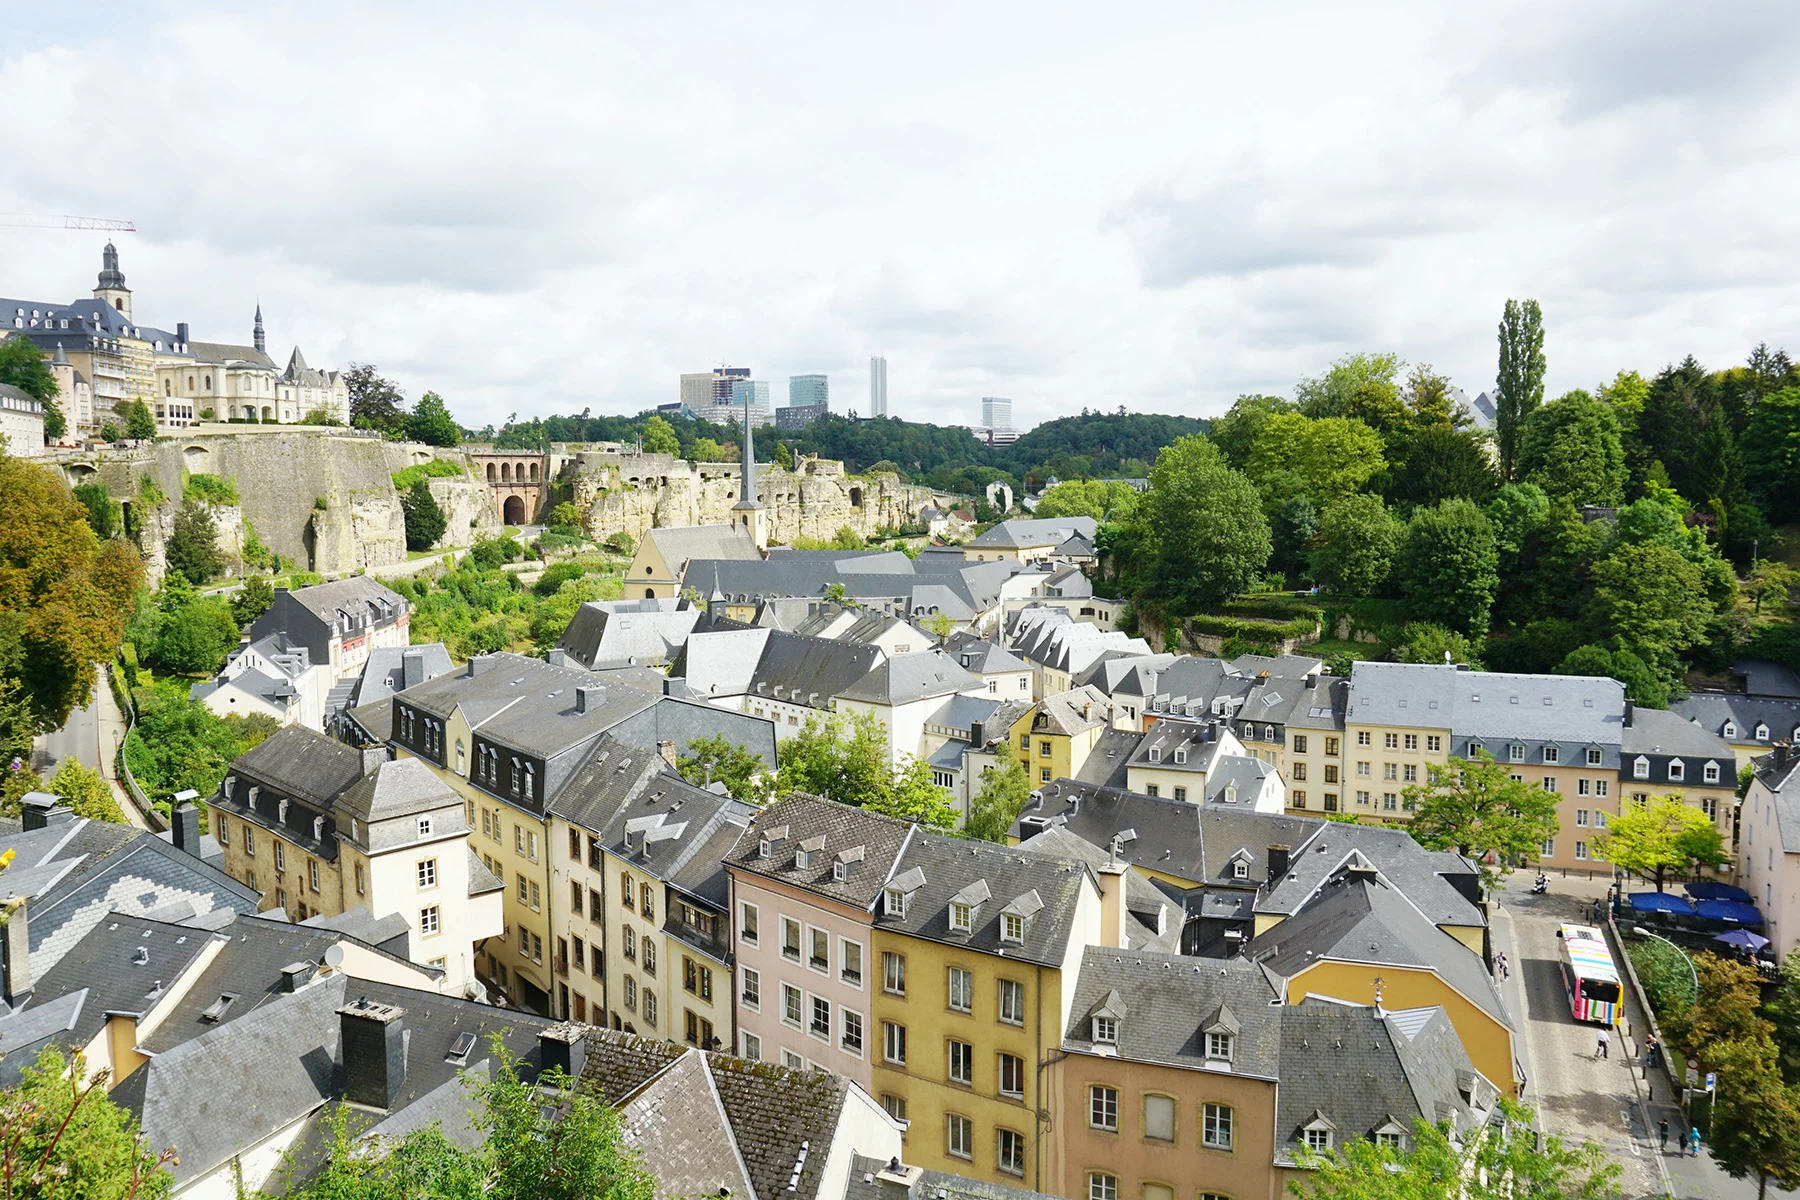 A view of Luxembourg City from above, showing houses in pastel colors and their roofs 